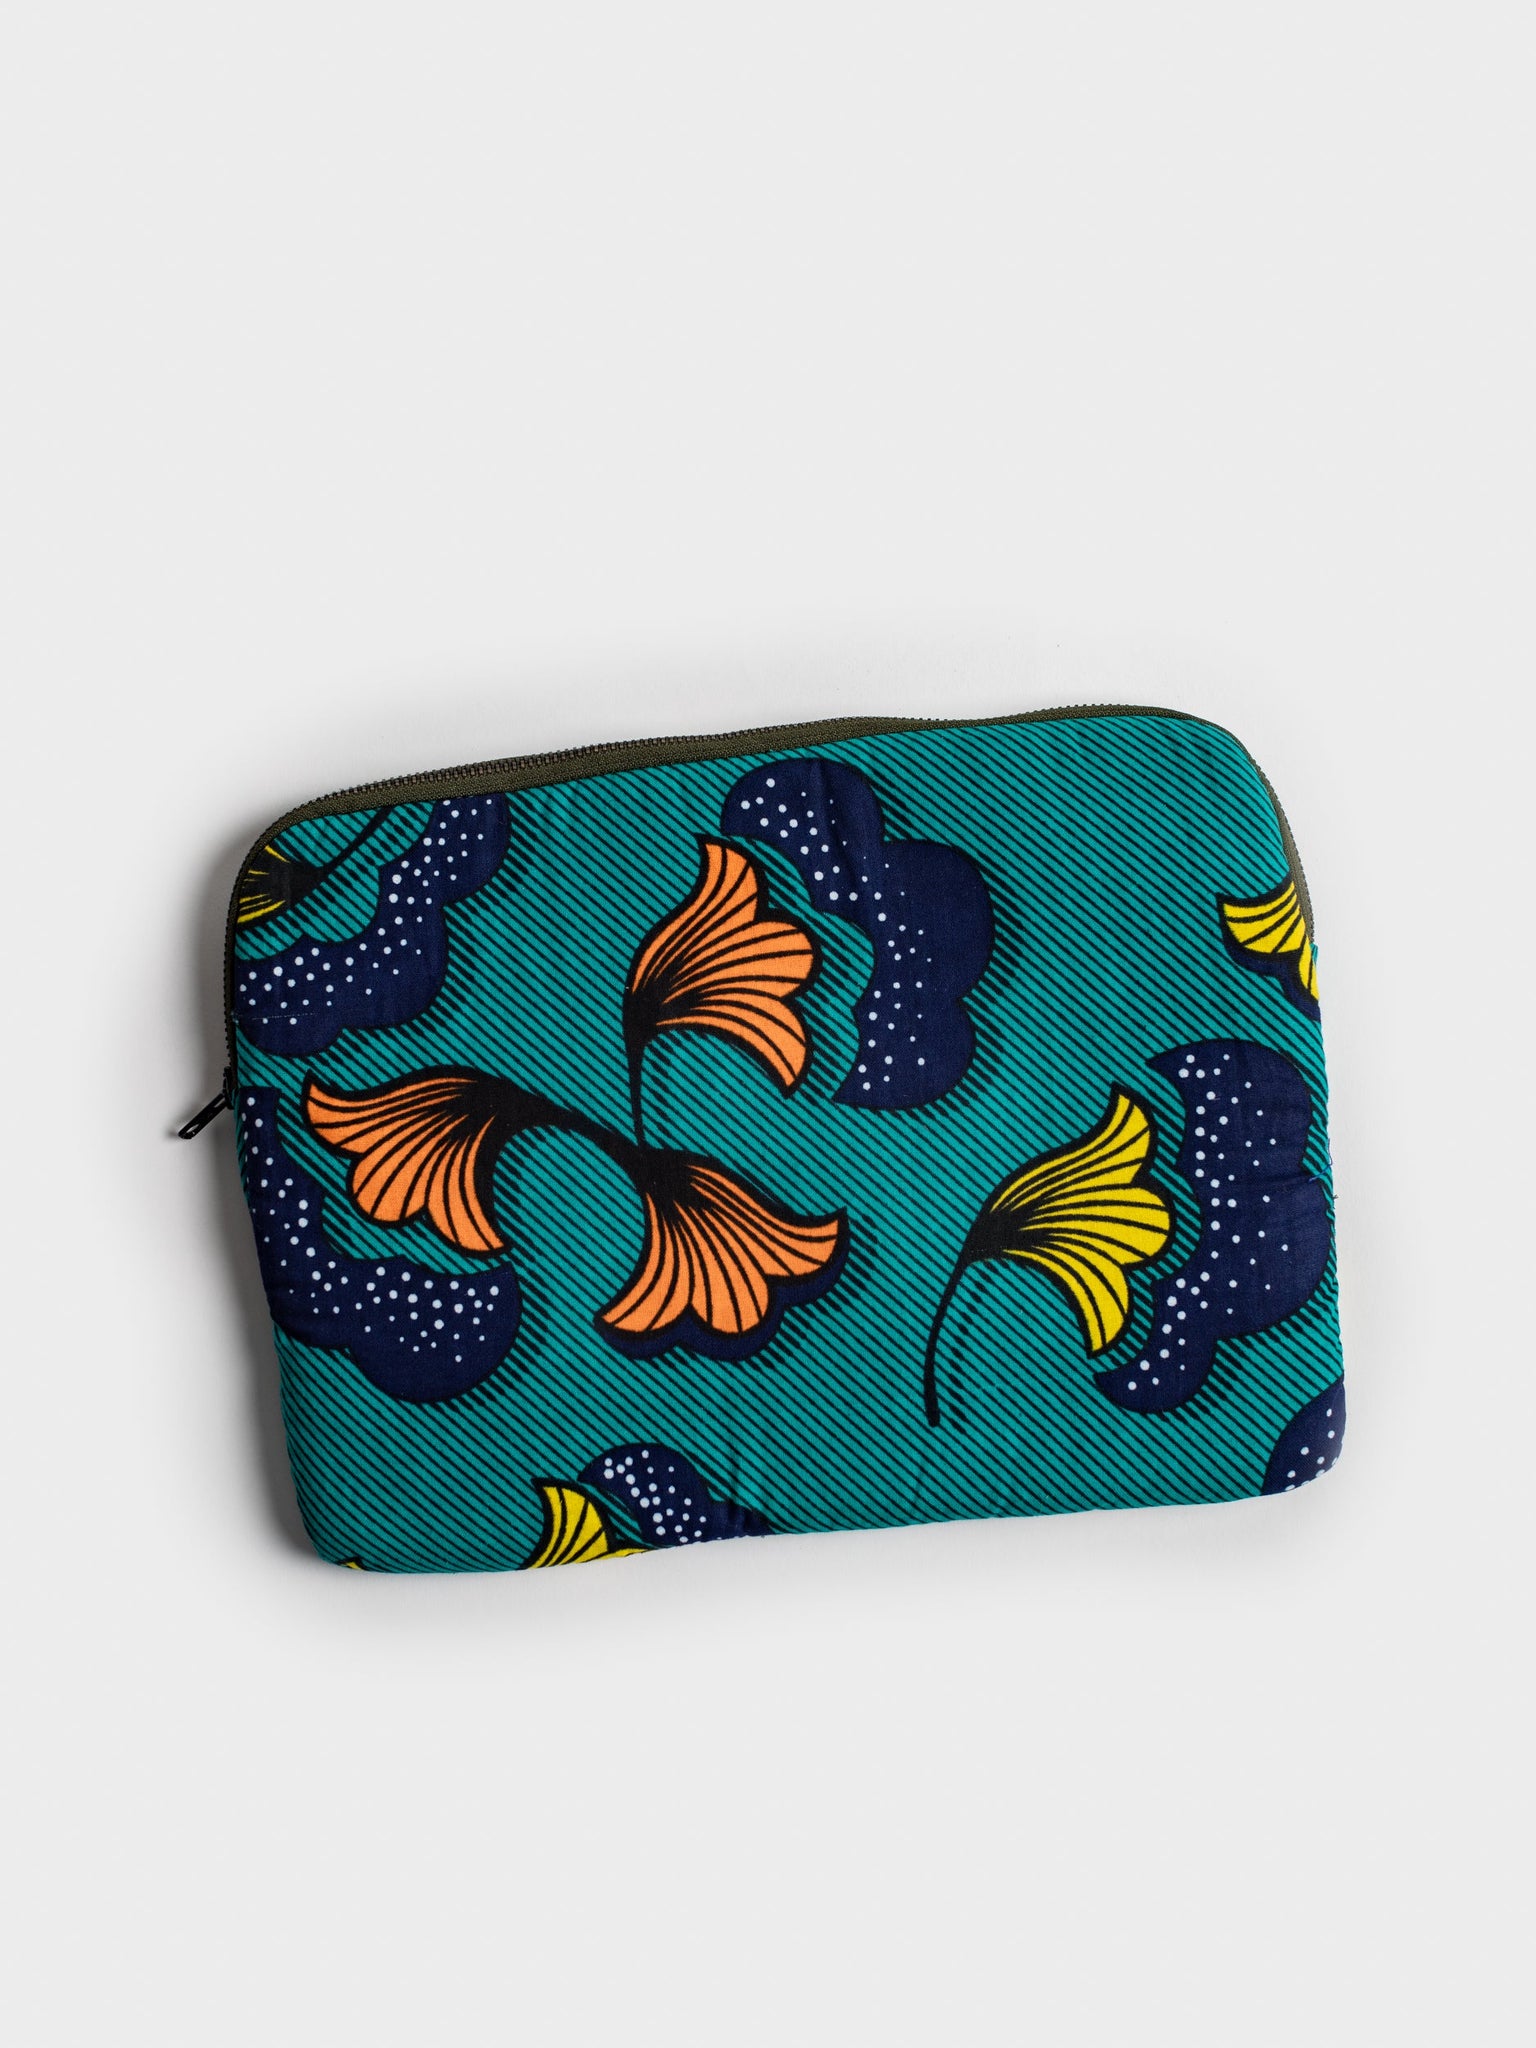 case for 12" computer with floral design from West Africa